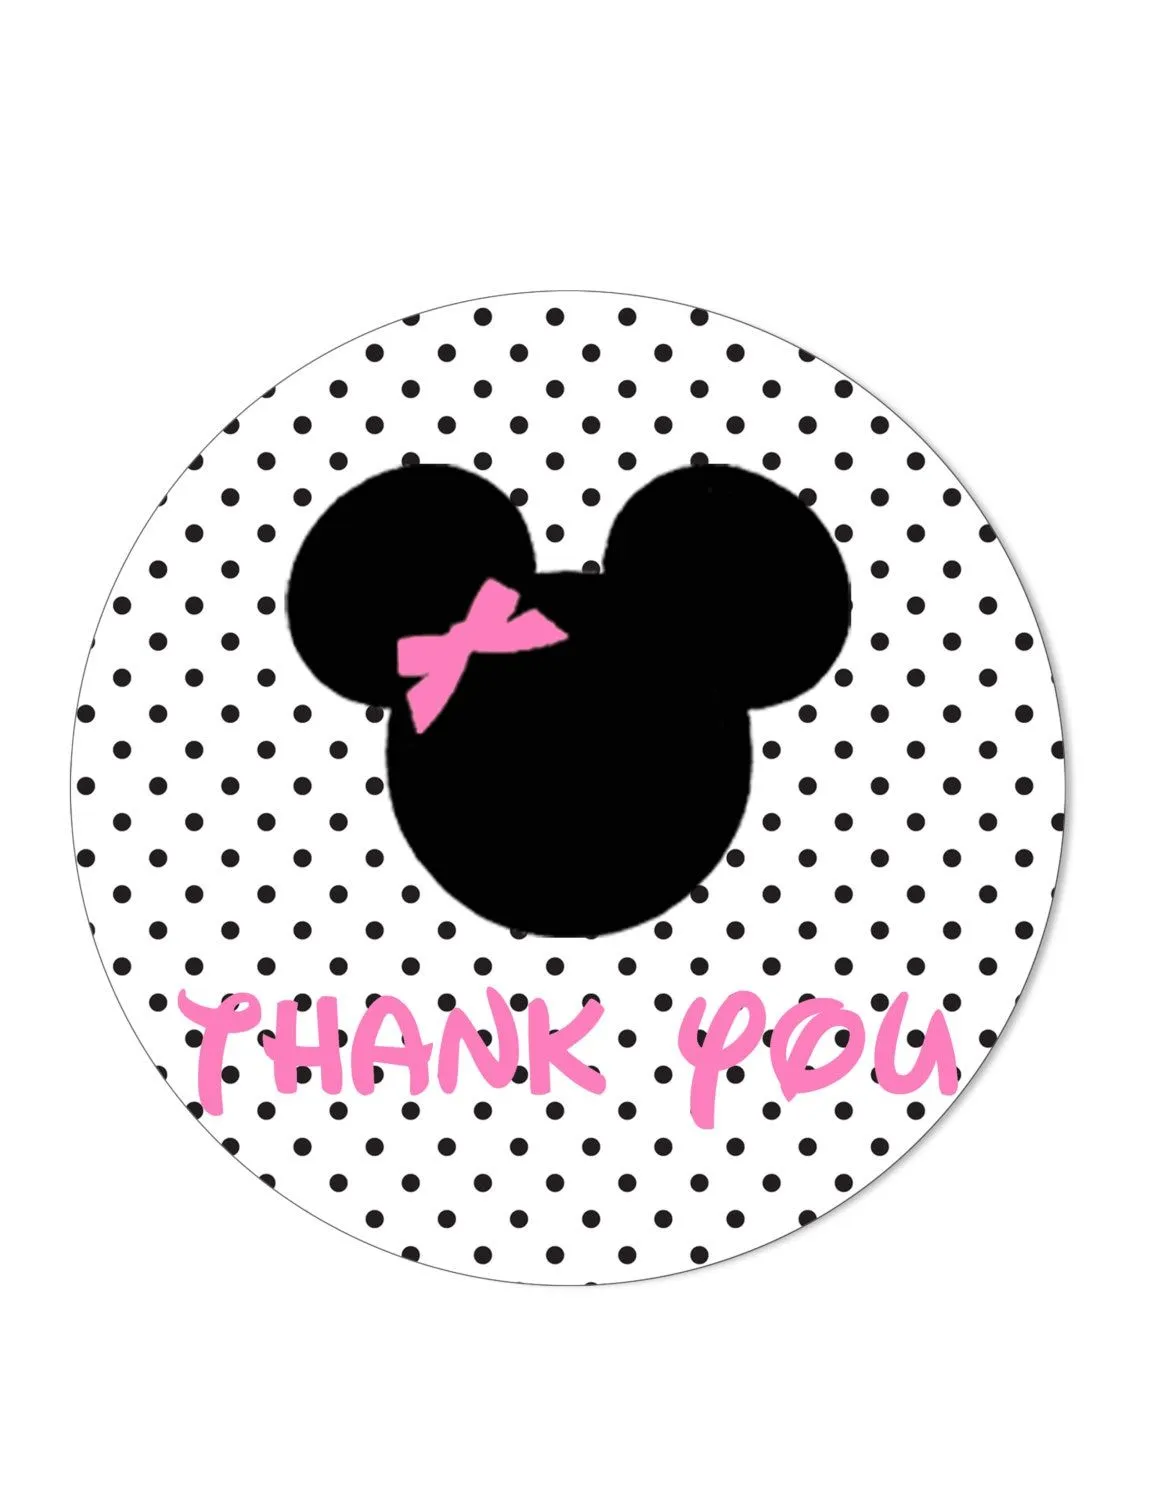 Popular items for minnie mouse tags on Etsy